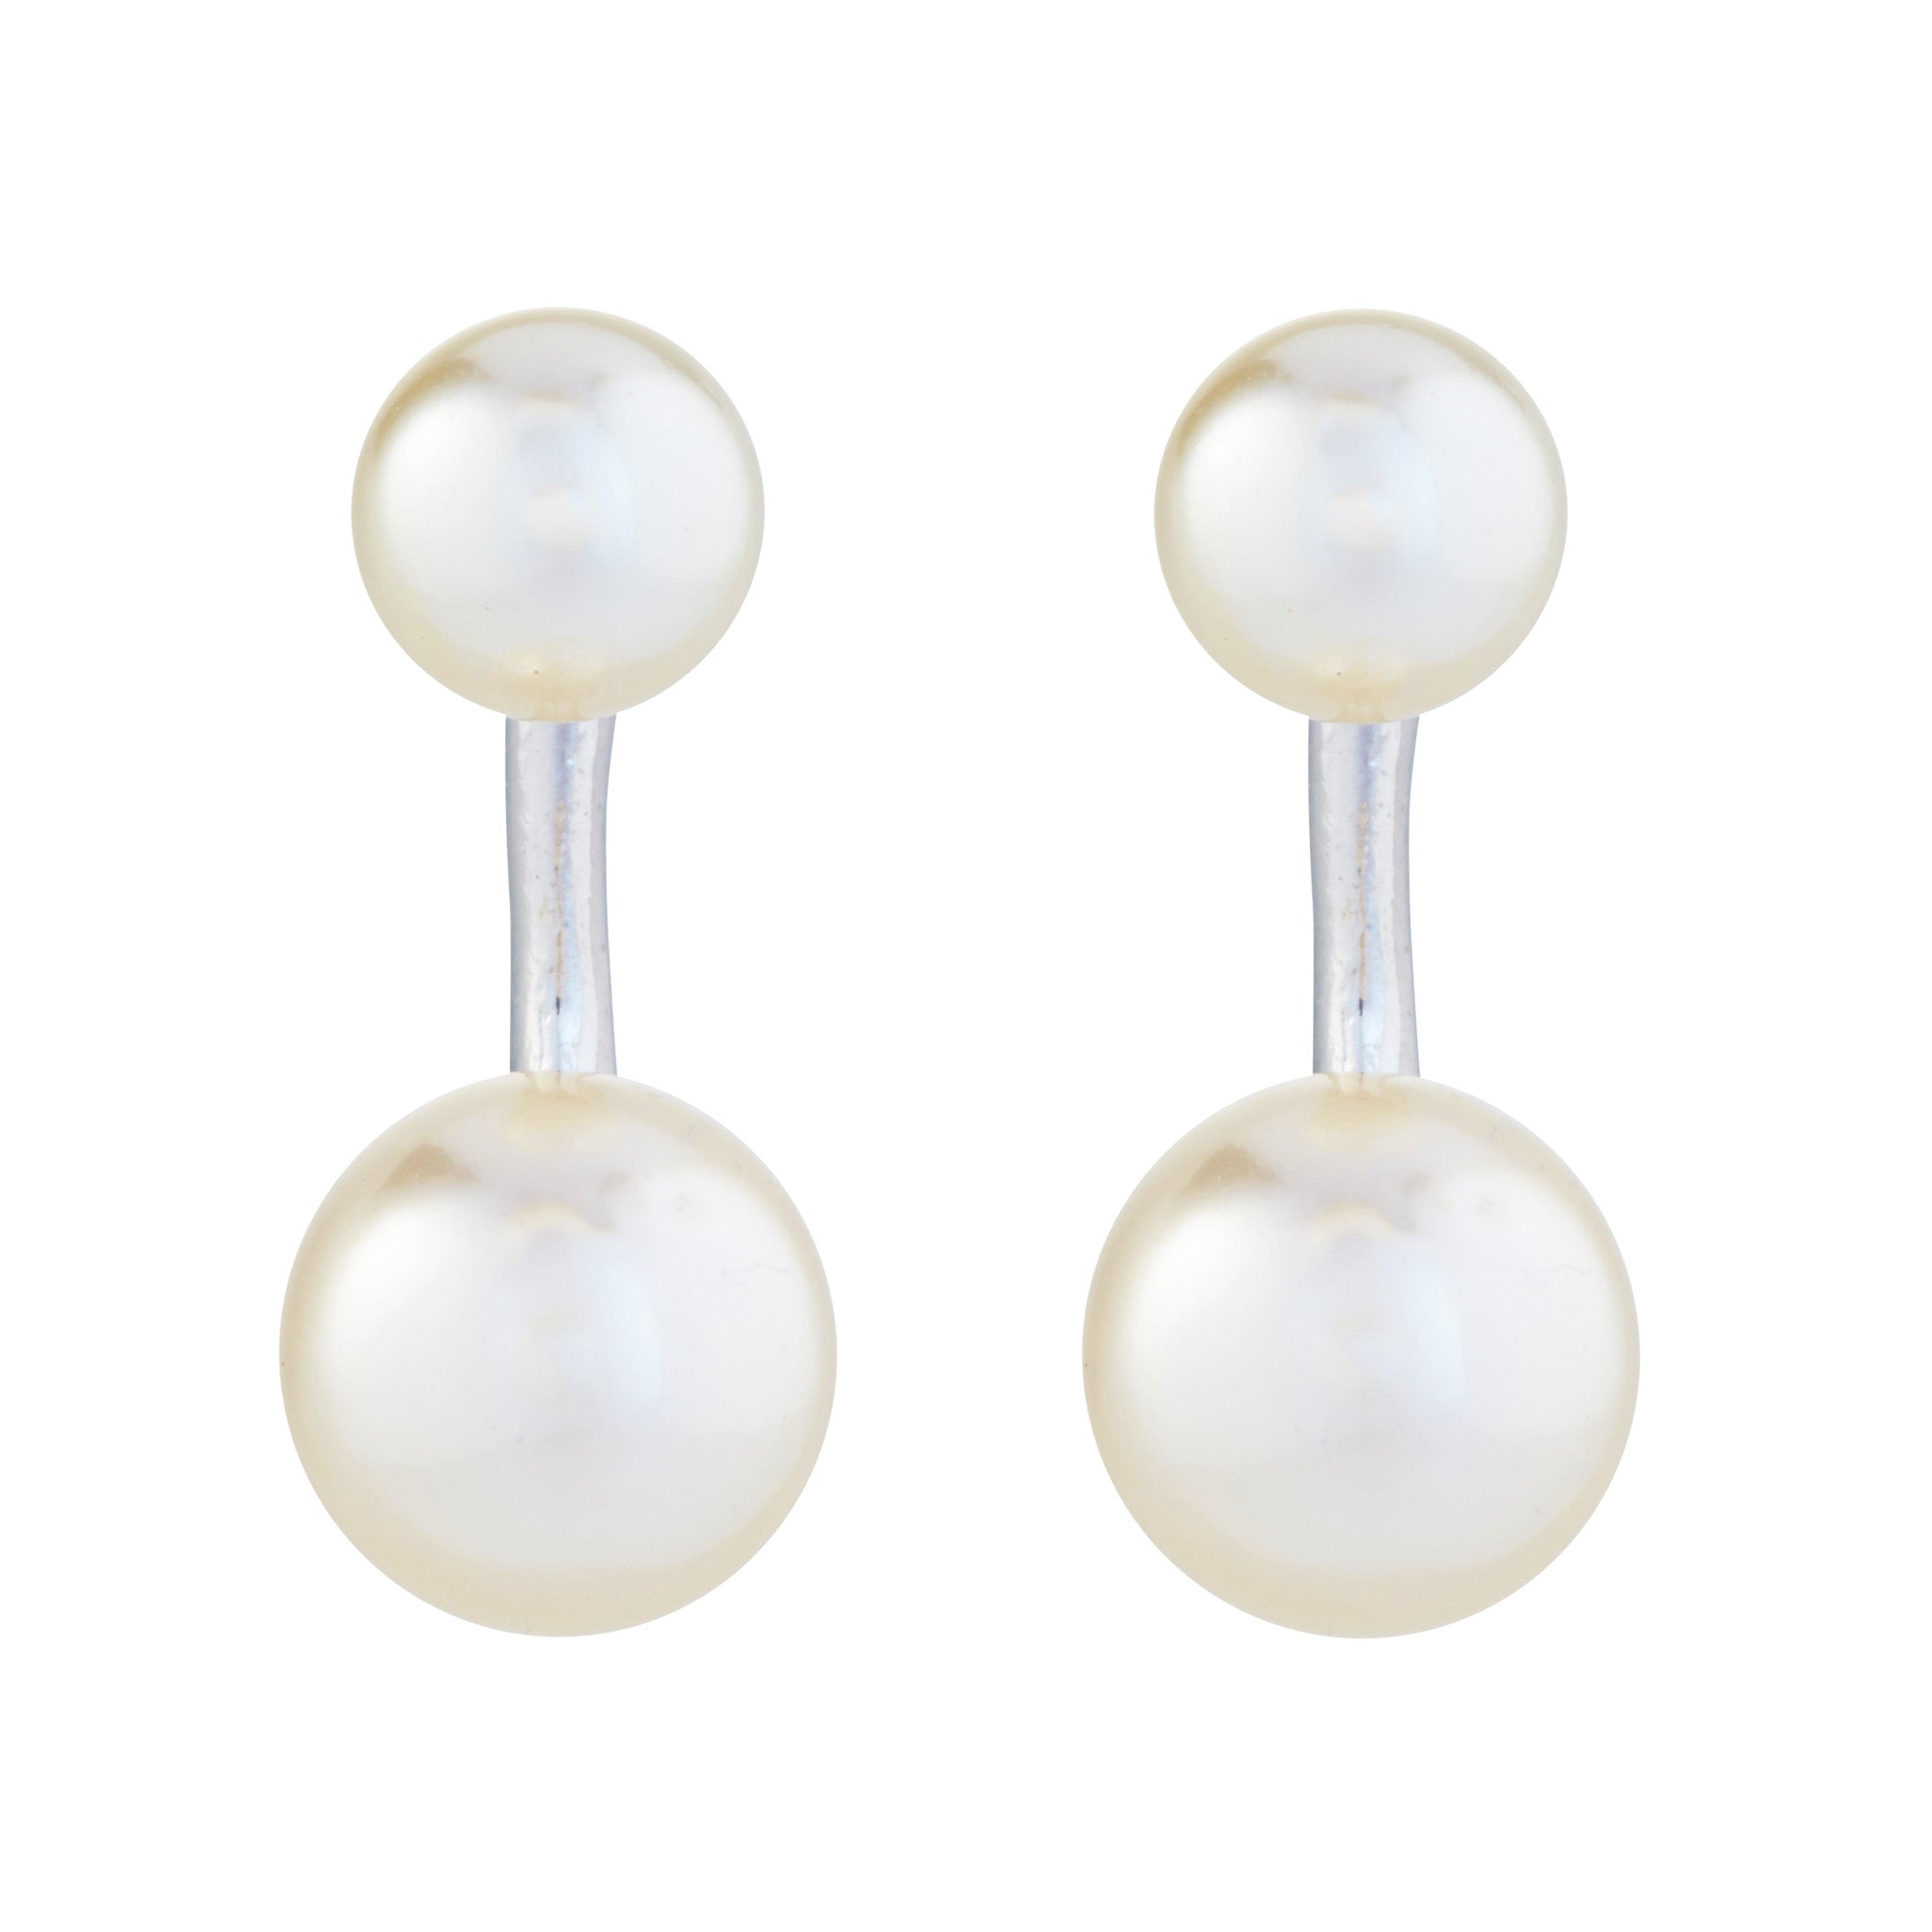 Knight & Day Earring Silver/Pearl